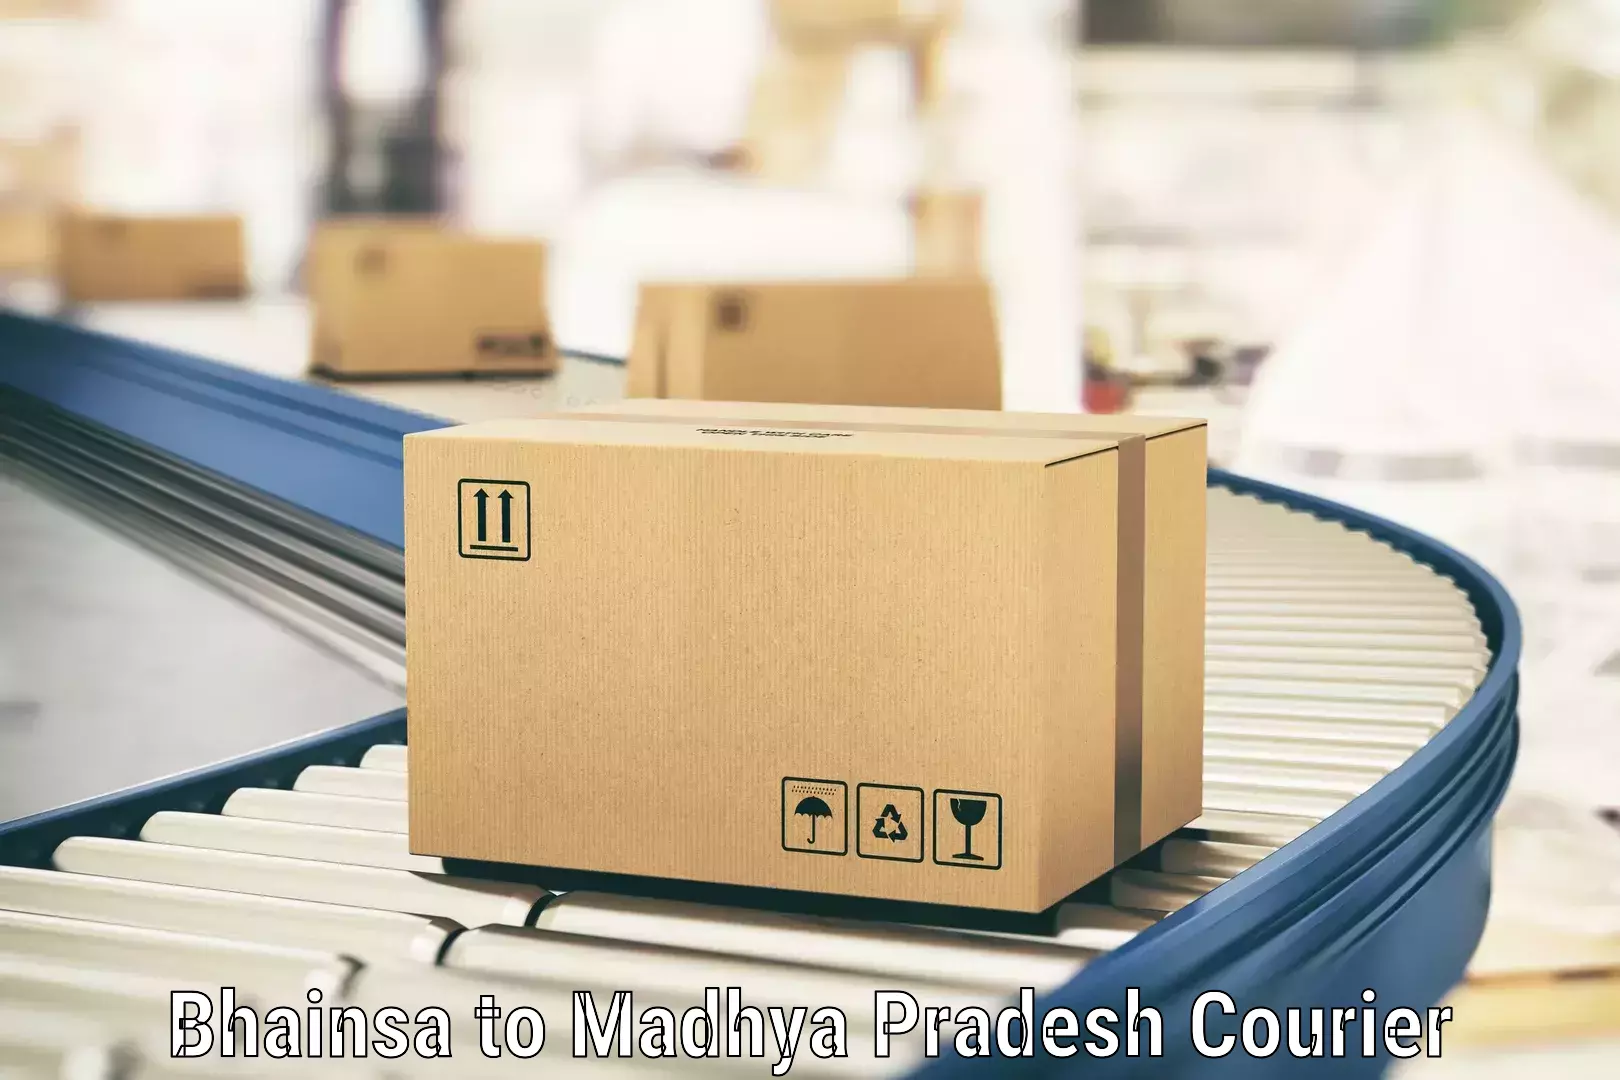 Reliable parcel services in Bhainsa to Amarwara